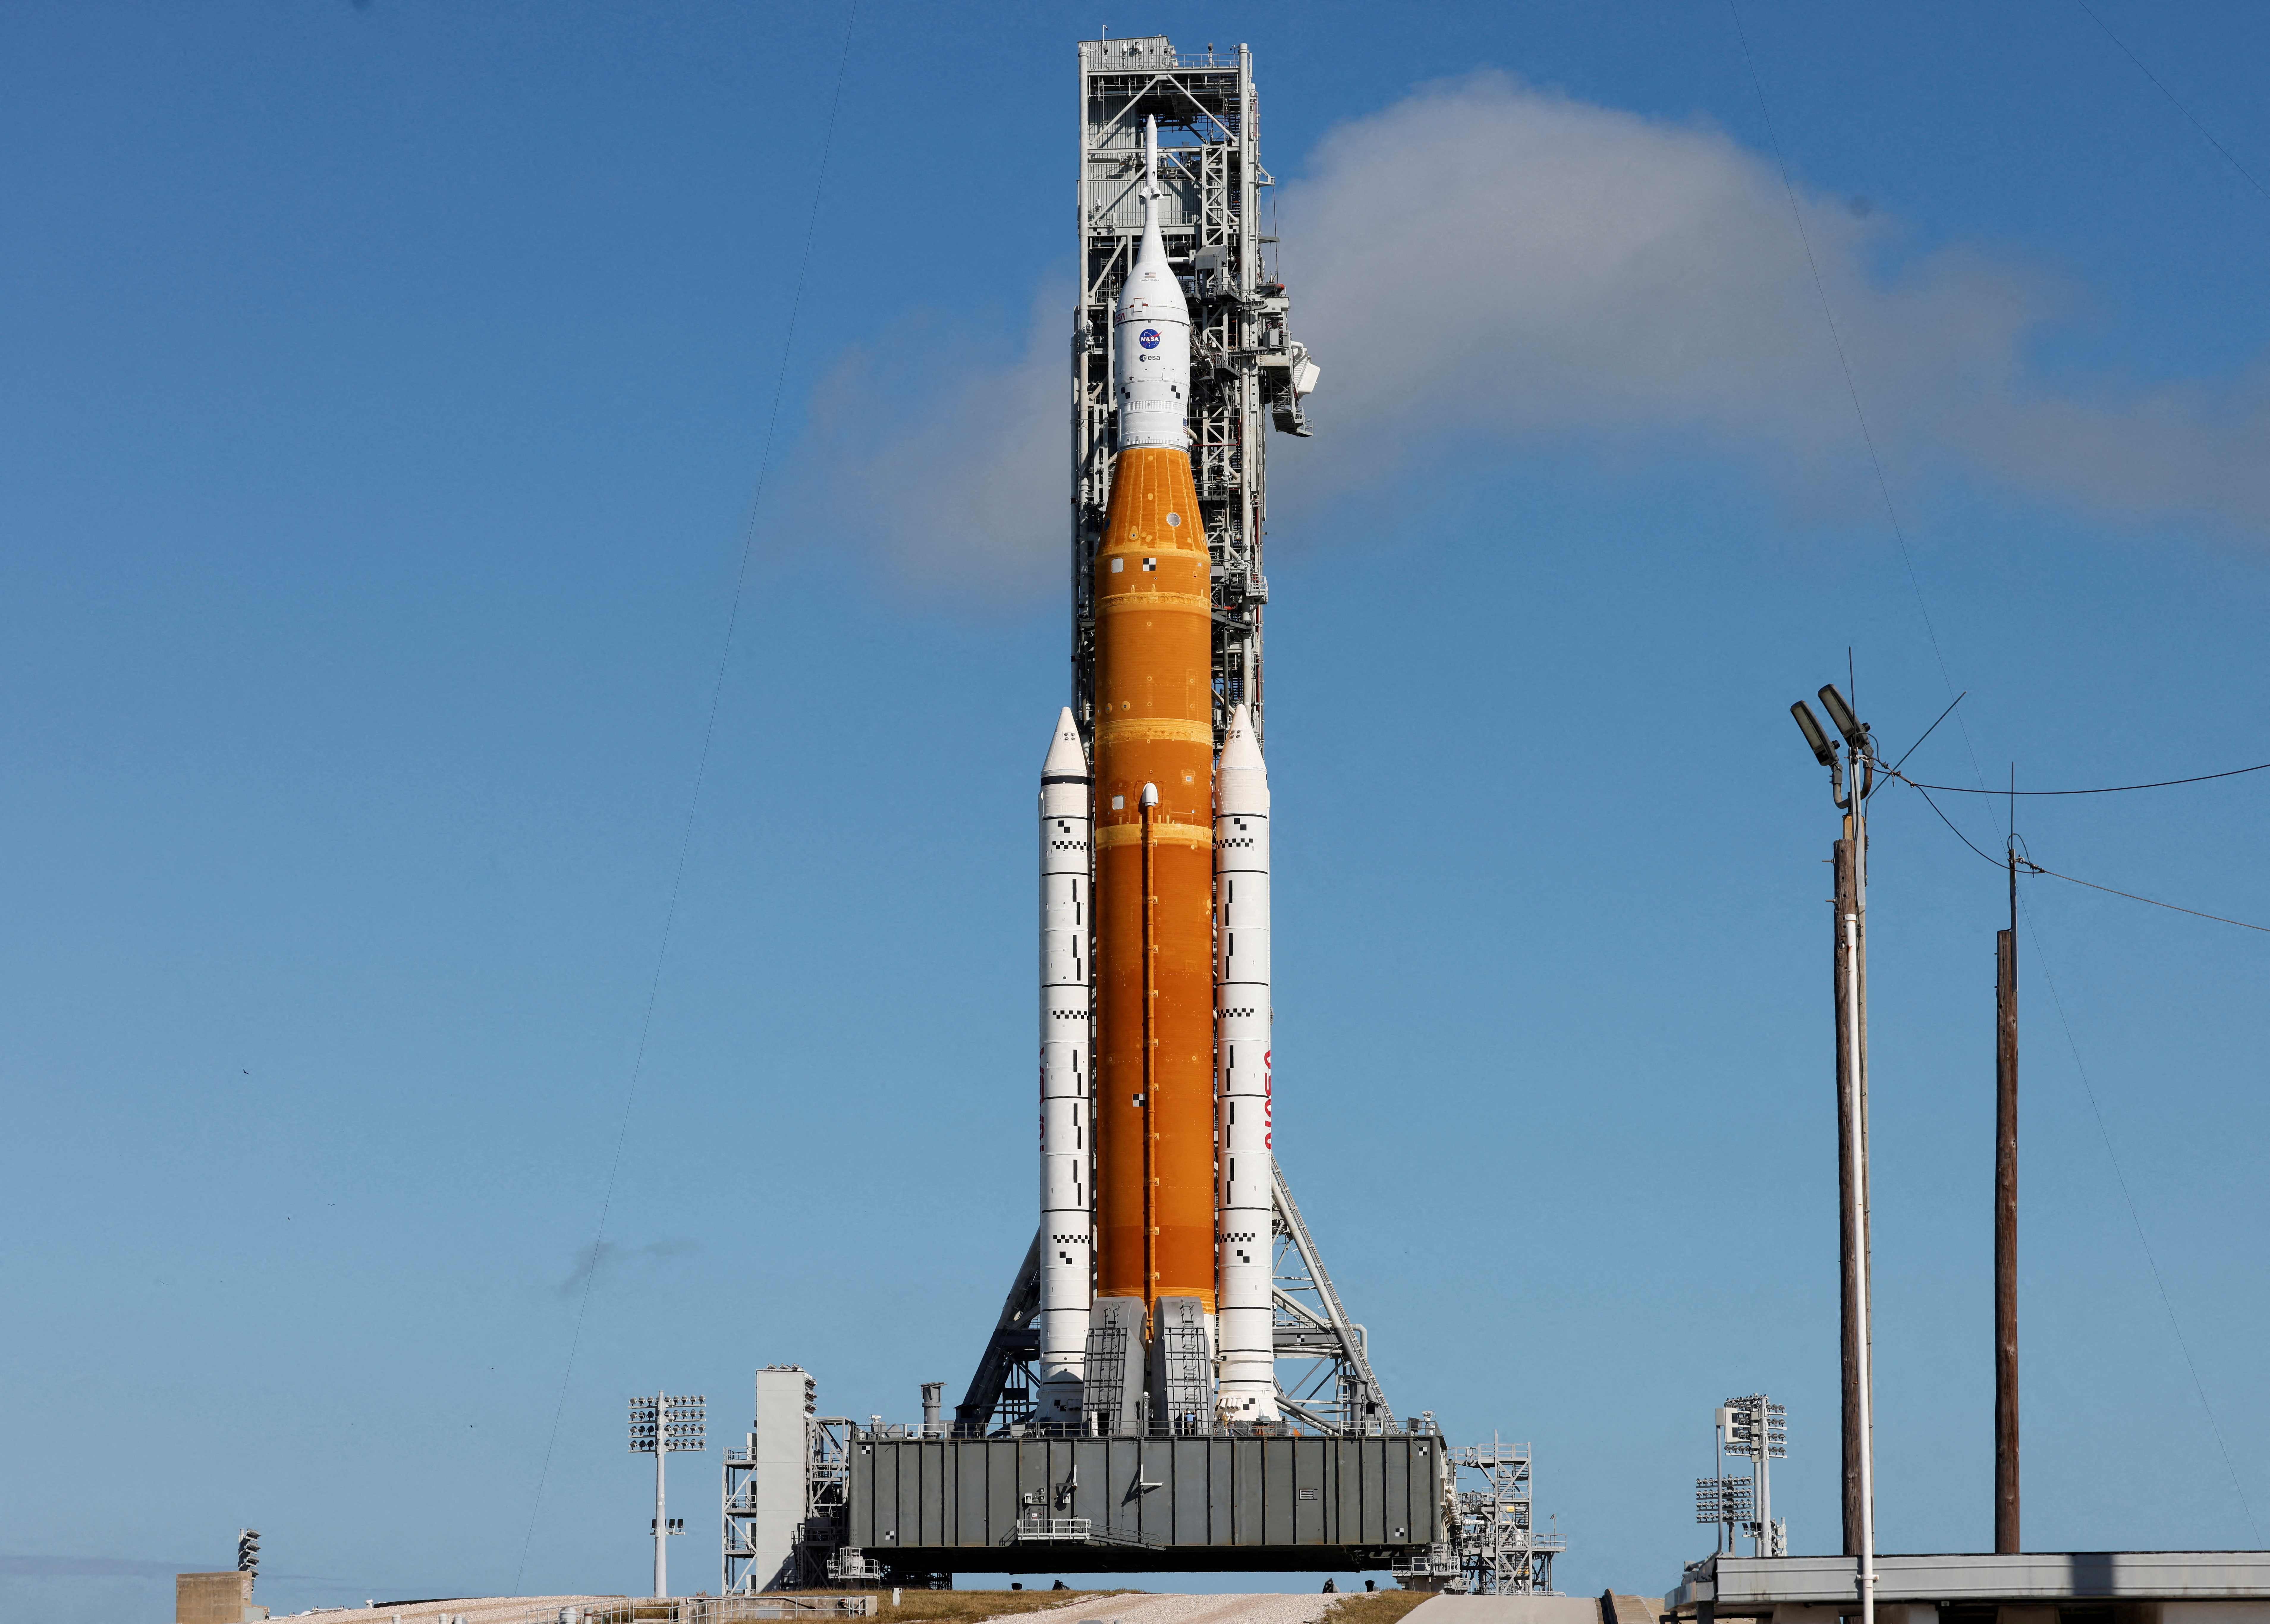 NASA's next-generation moon rocket, the Space Launch System (SLS) rocket with its Orion crew capsule perched on top, is shown on its launch pad as it is prepared for launch in Cape Canaveral